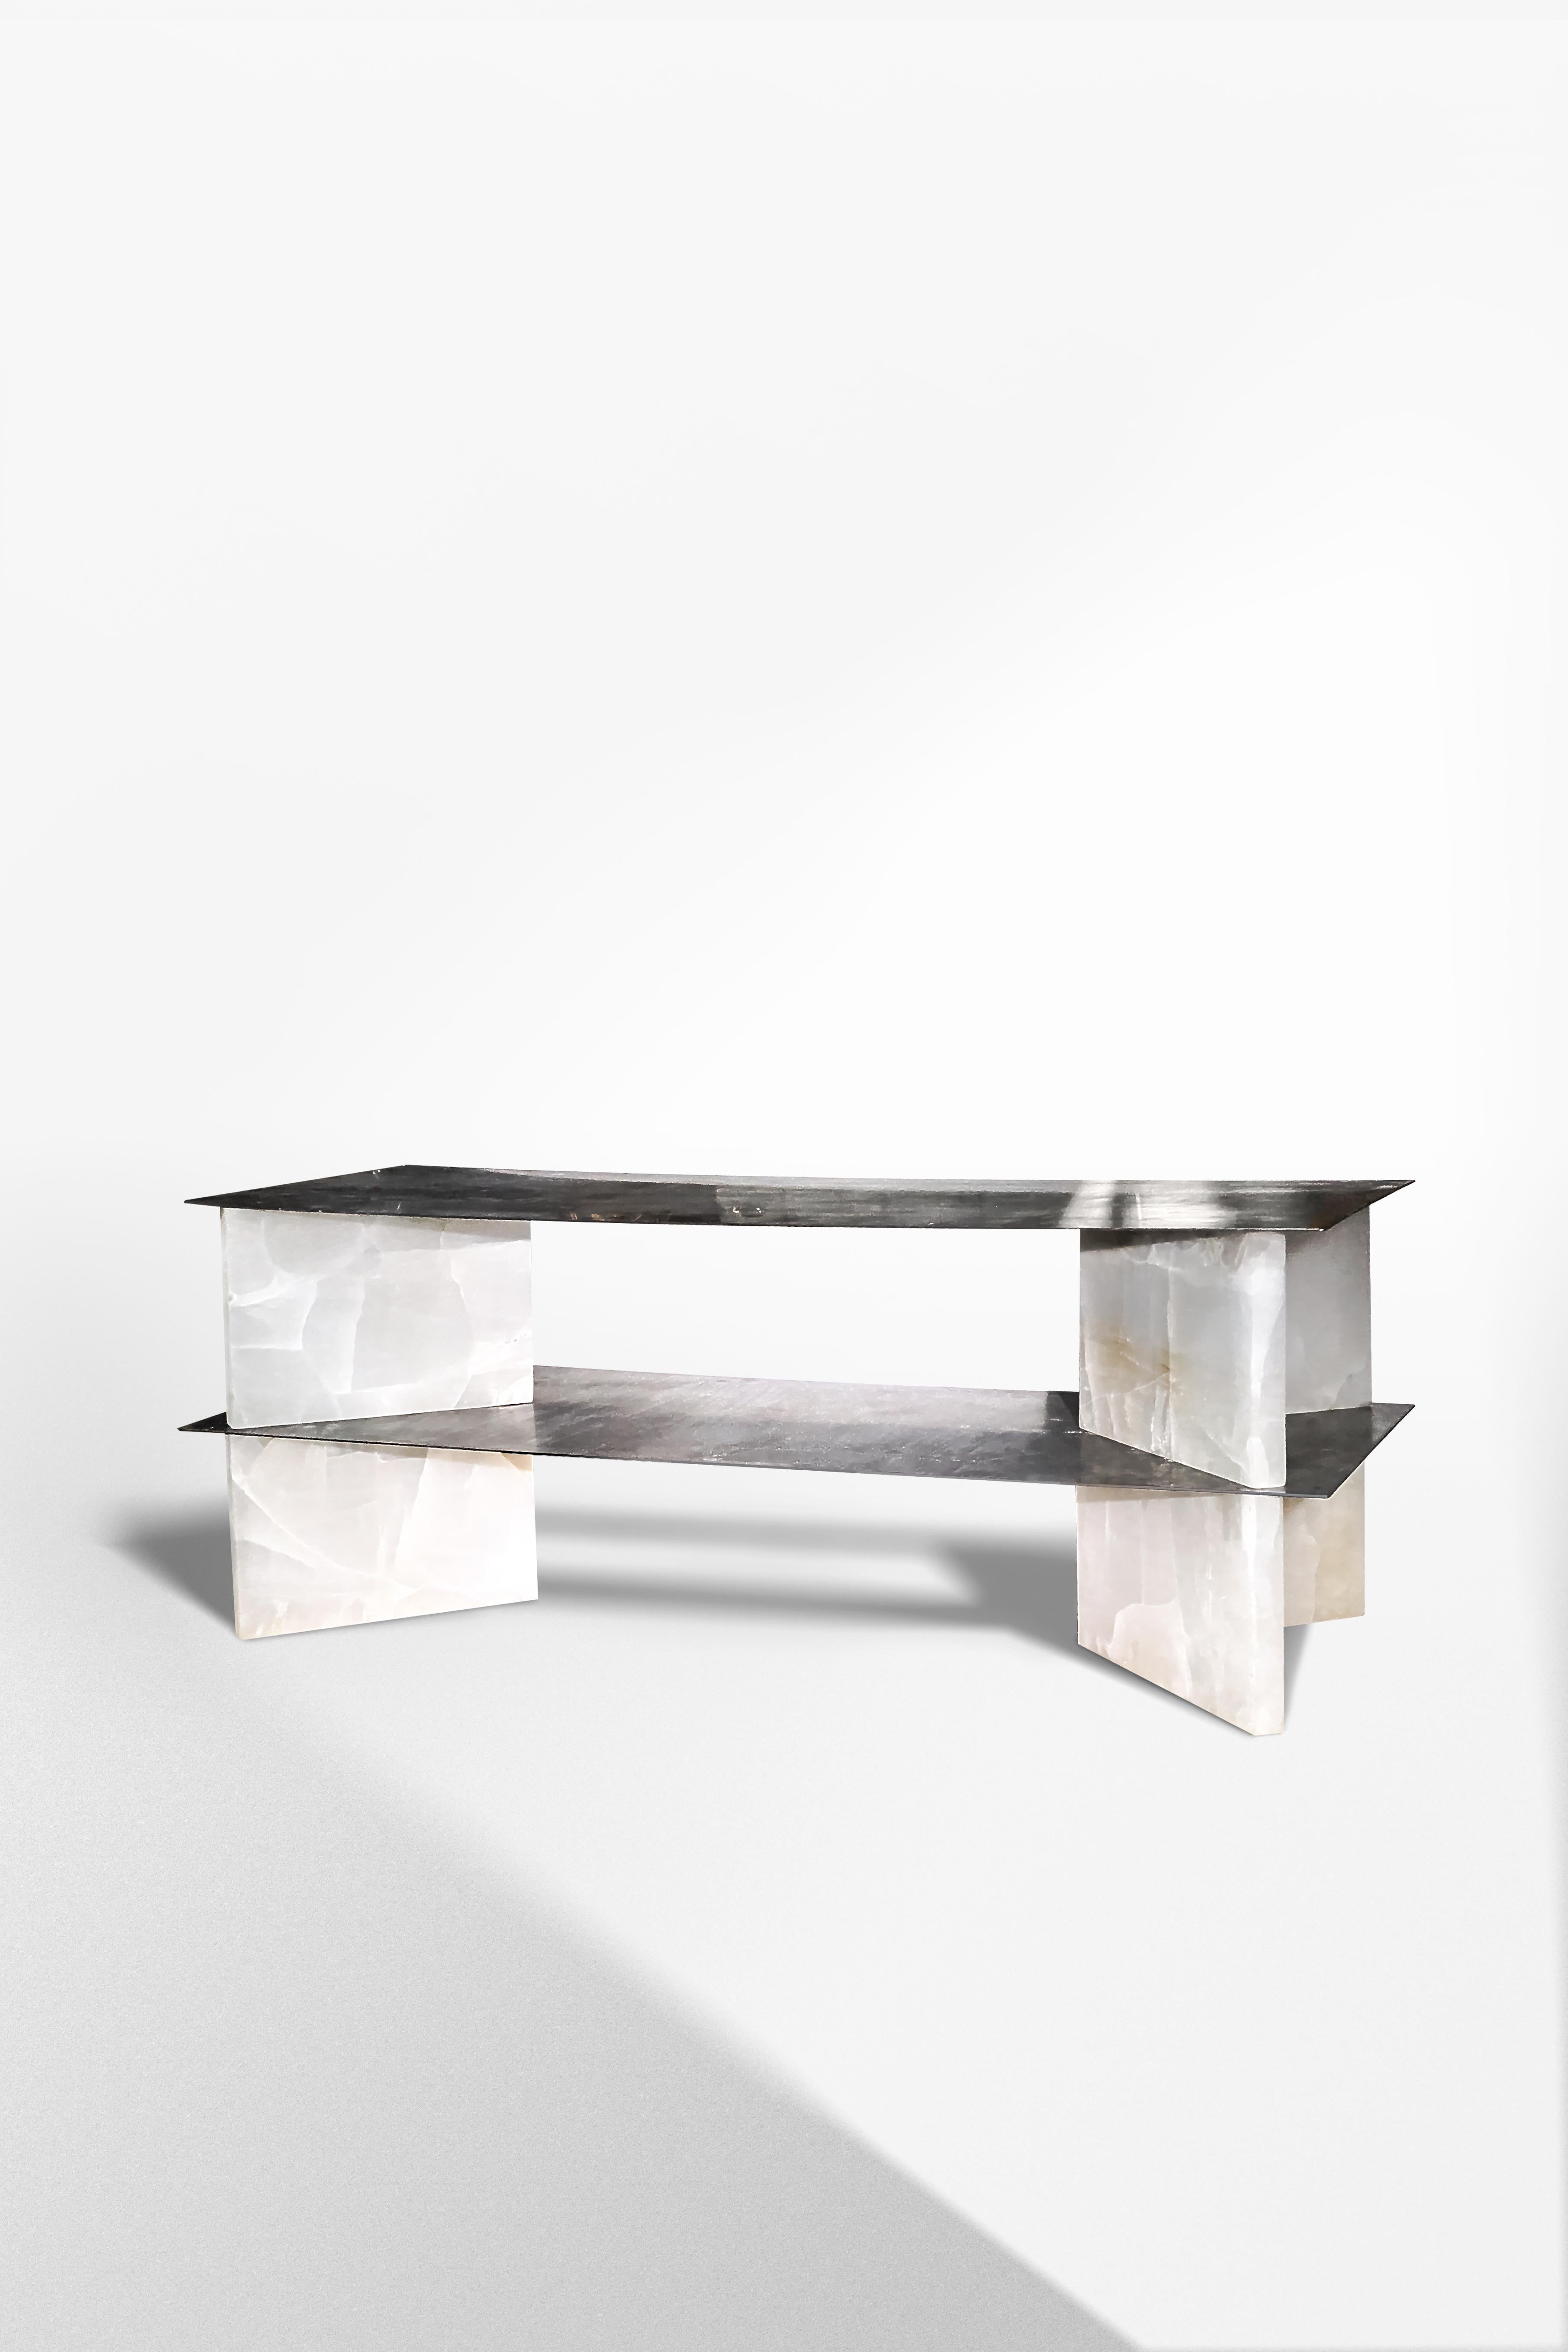 White Onyx Low Console by Studiopepe
Limited Edition Of 8 Pieces.
Dimensions: D 59 x W 153 x H 53 cm.
Materials: White onyx and stainless steel.

Multifaceted design agency Studiopepe was founded in Milan in 2006. Eclectic, voguish, it is the